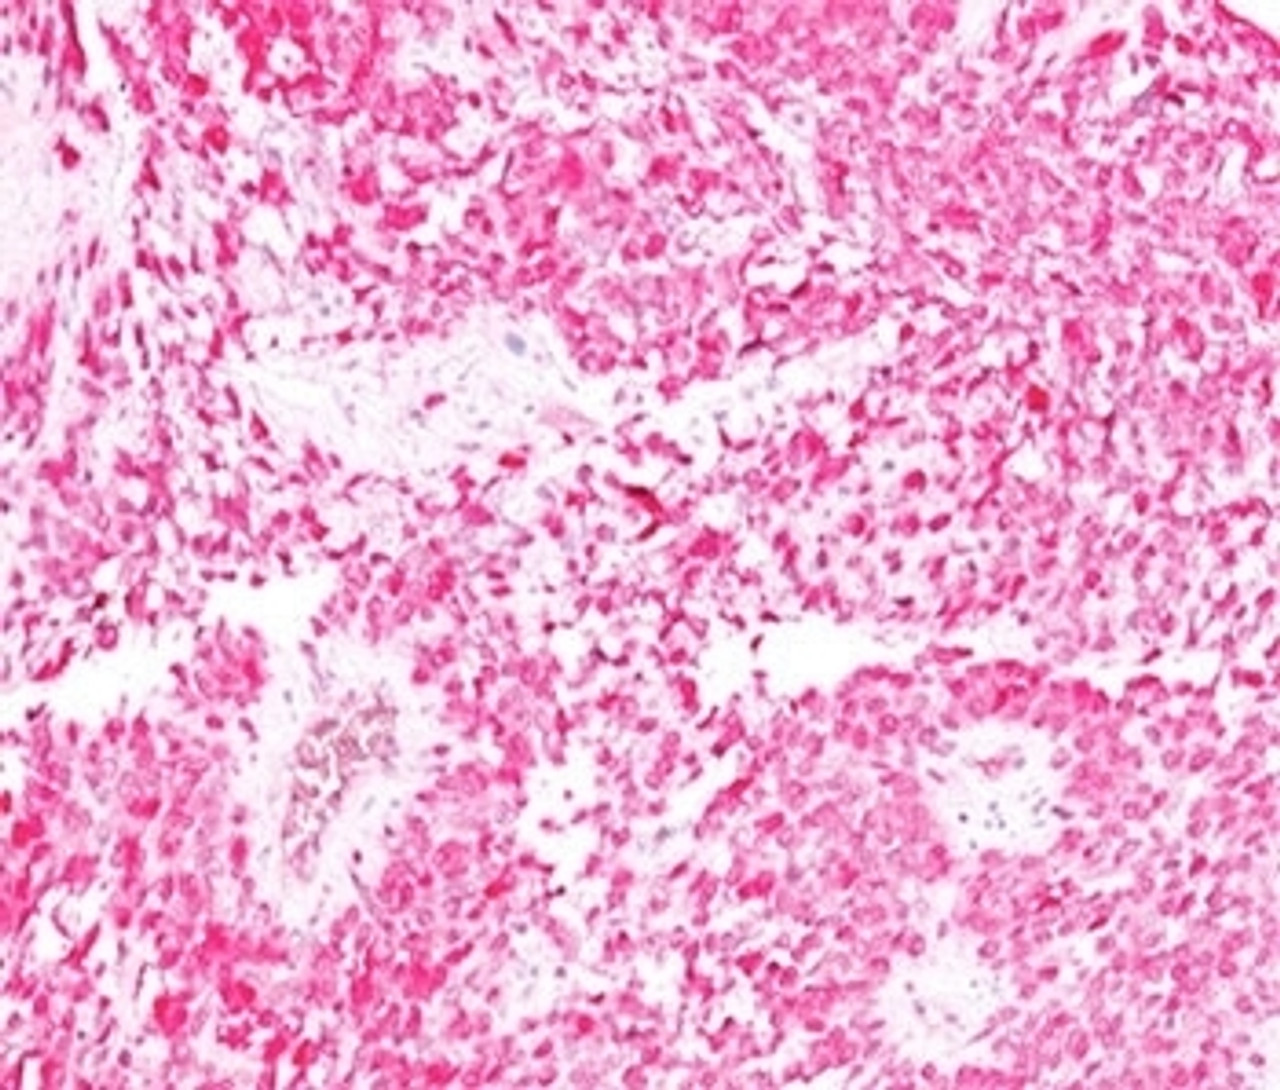 IHC testing of human melanoma stained with S100B antibody + AEC chromogen (clone 4C4.9) . No special pretreatment is required for IHC staining of formalin-paraffin tissues.